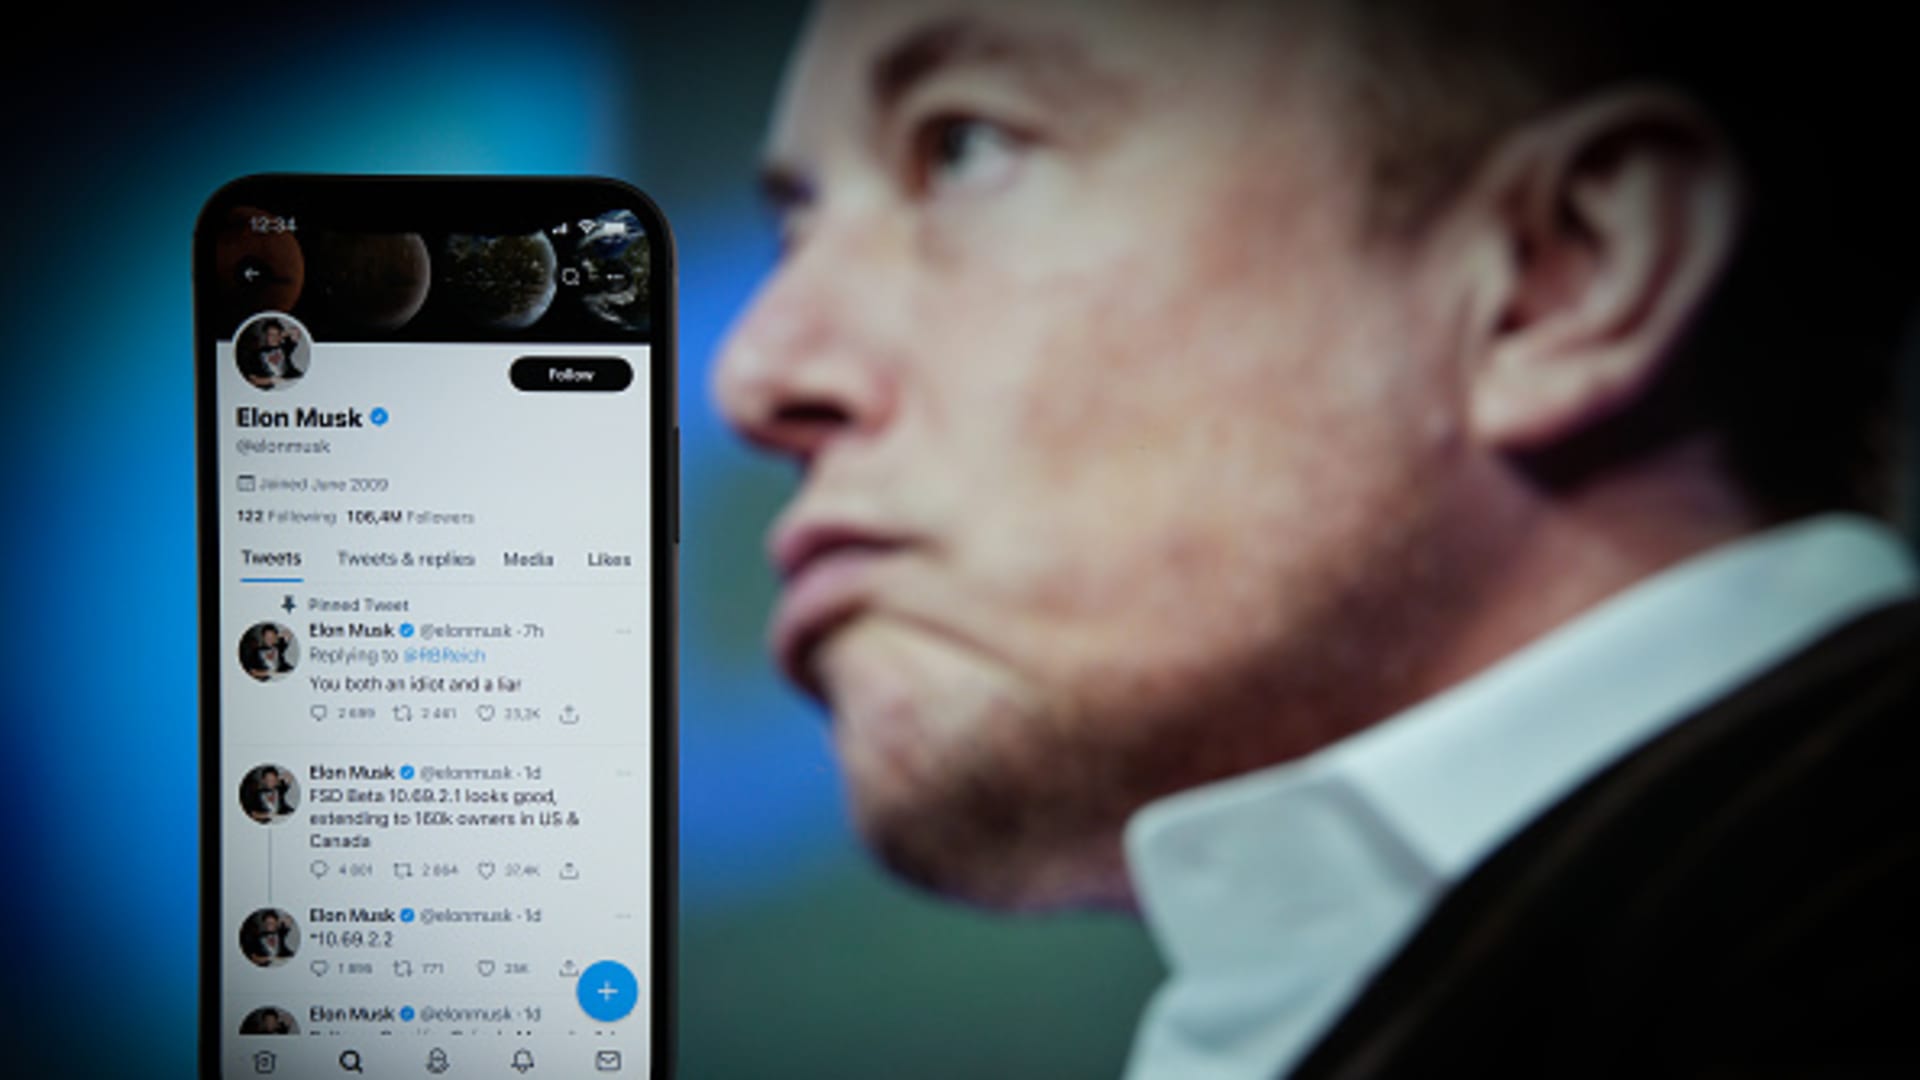 Here are the people who texted Elon Musk to offer advice or money for the Twitter deal